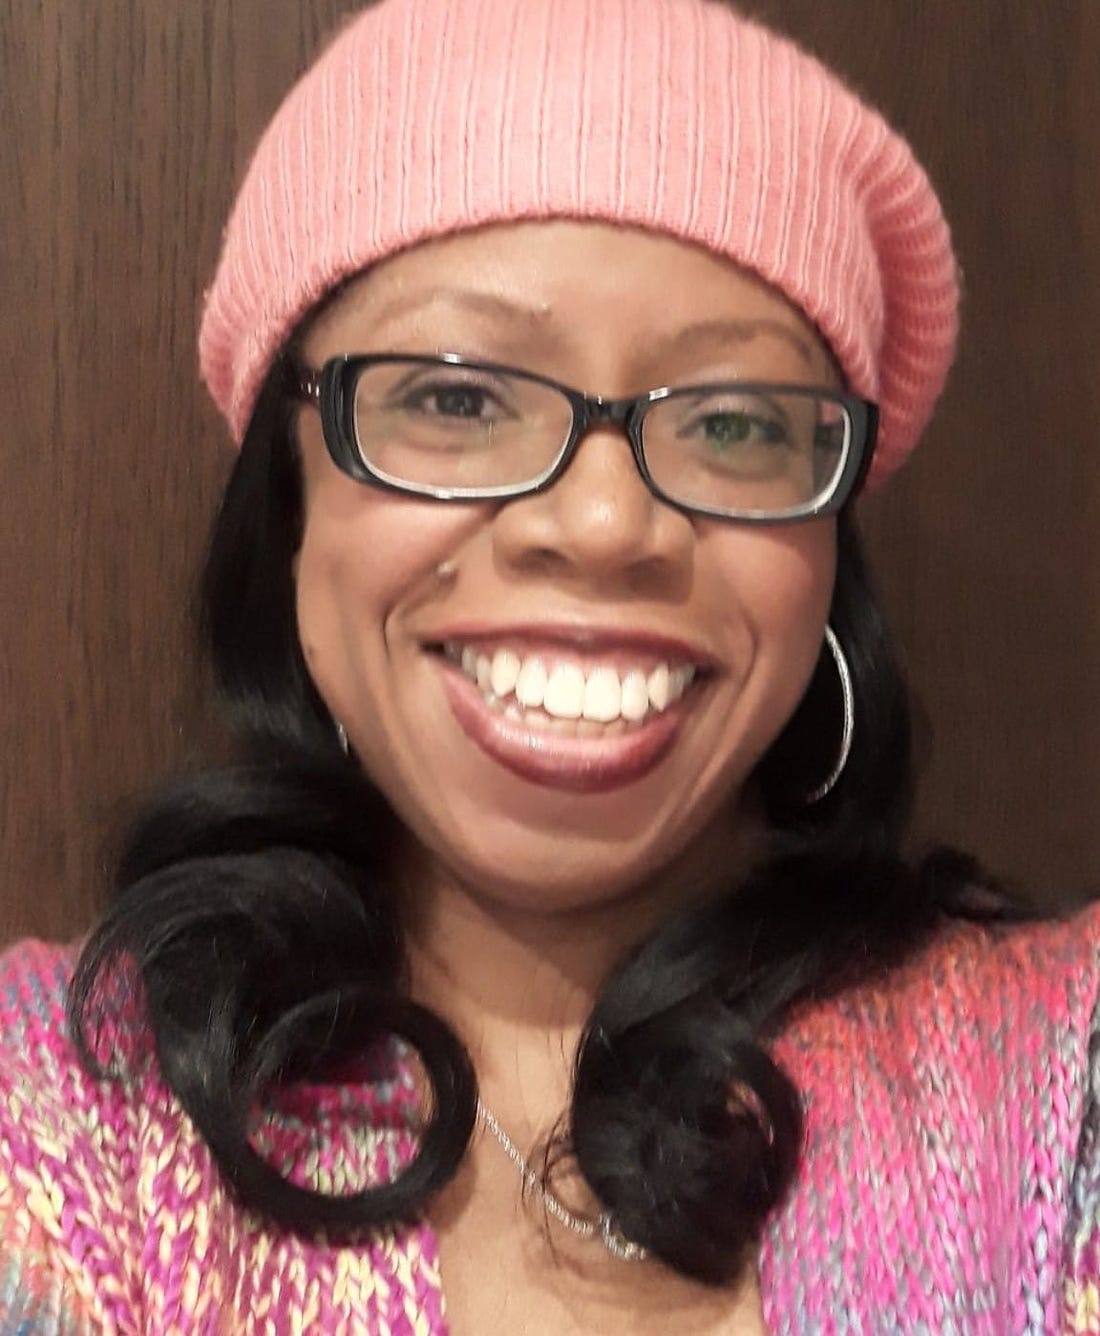 Damianne Scott is devoted to helping Jane Austen readers and teachers see that Jane Austen is for everyone. She hosts the popular Facebook page “Black Girl Loves Jane” and got into classic literature as a teen. 